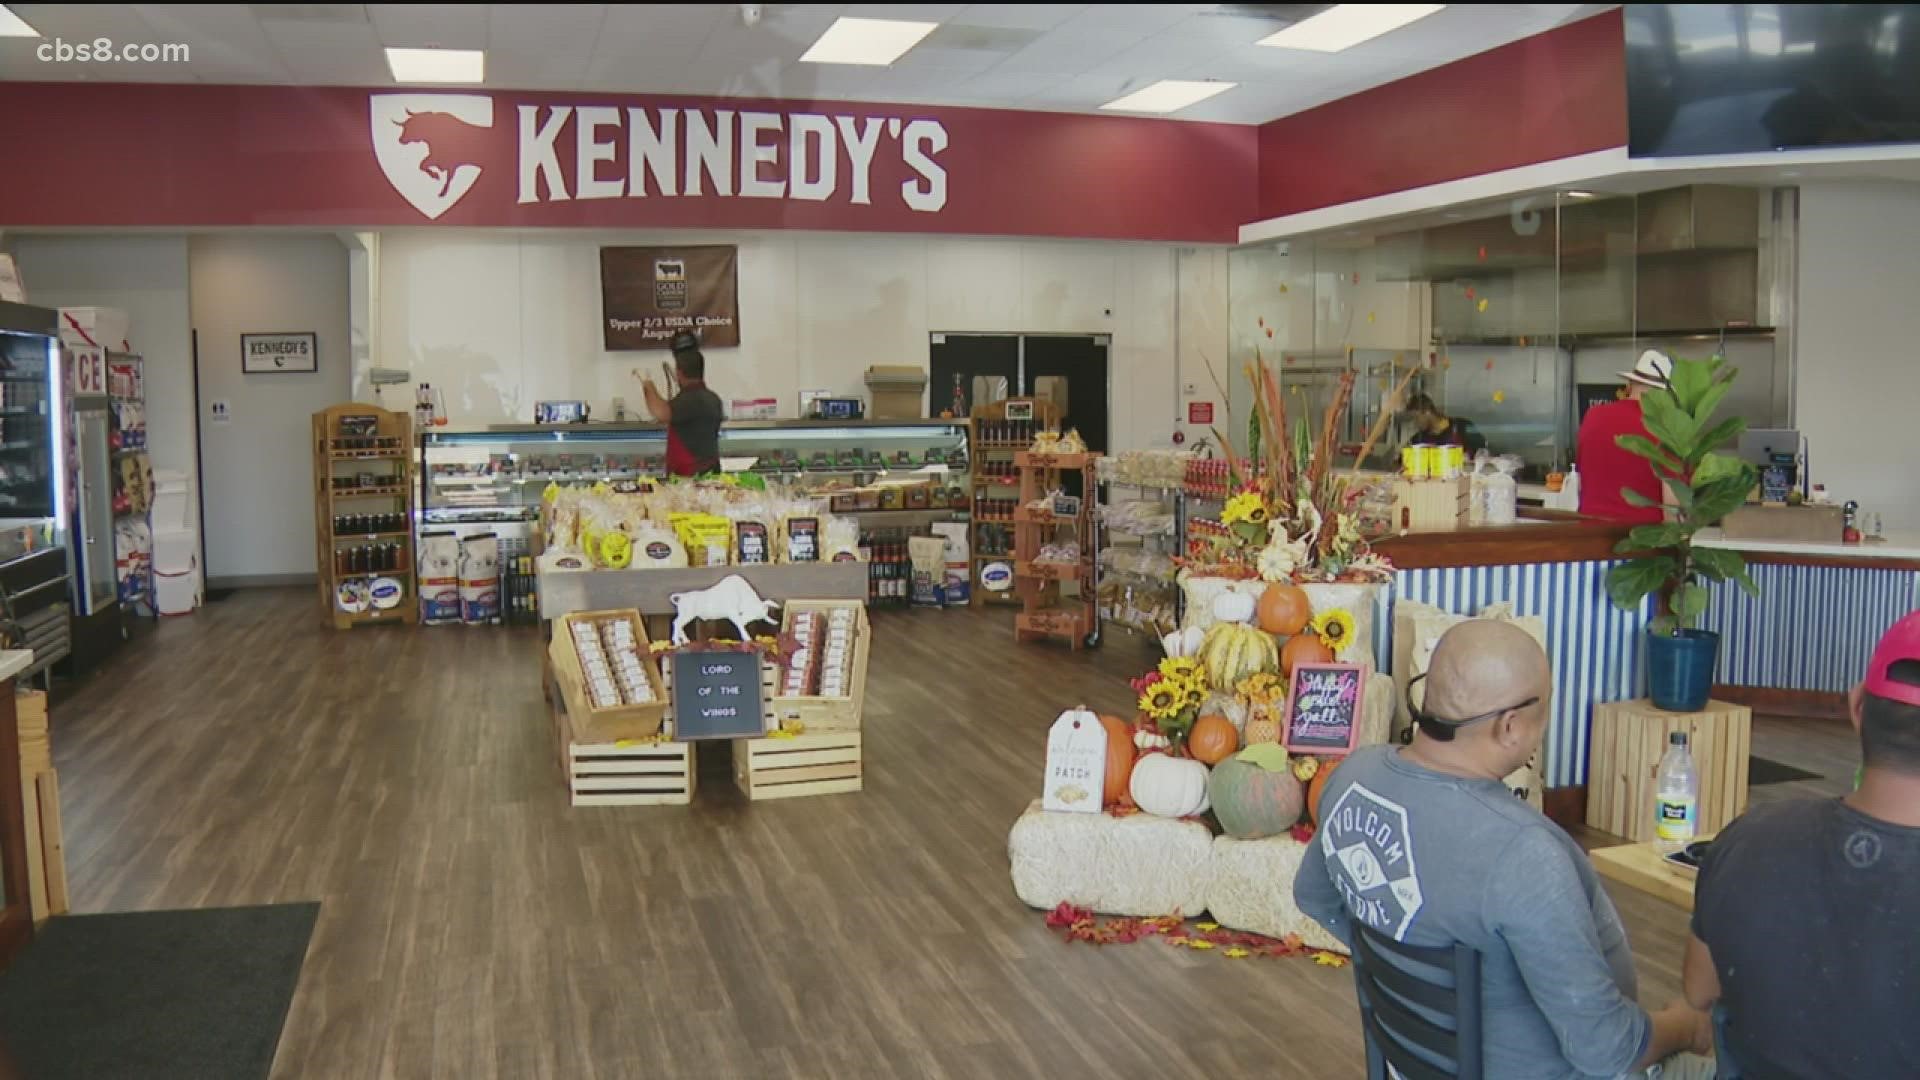 Kennedy's Meat Company is located in Escondido. Their first location opened in Imperial County back in 1972.